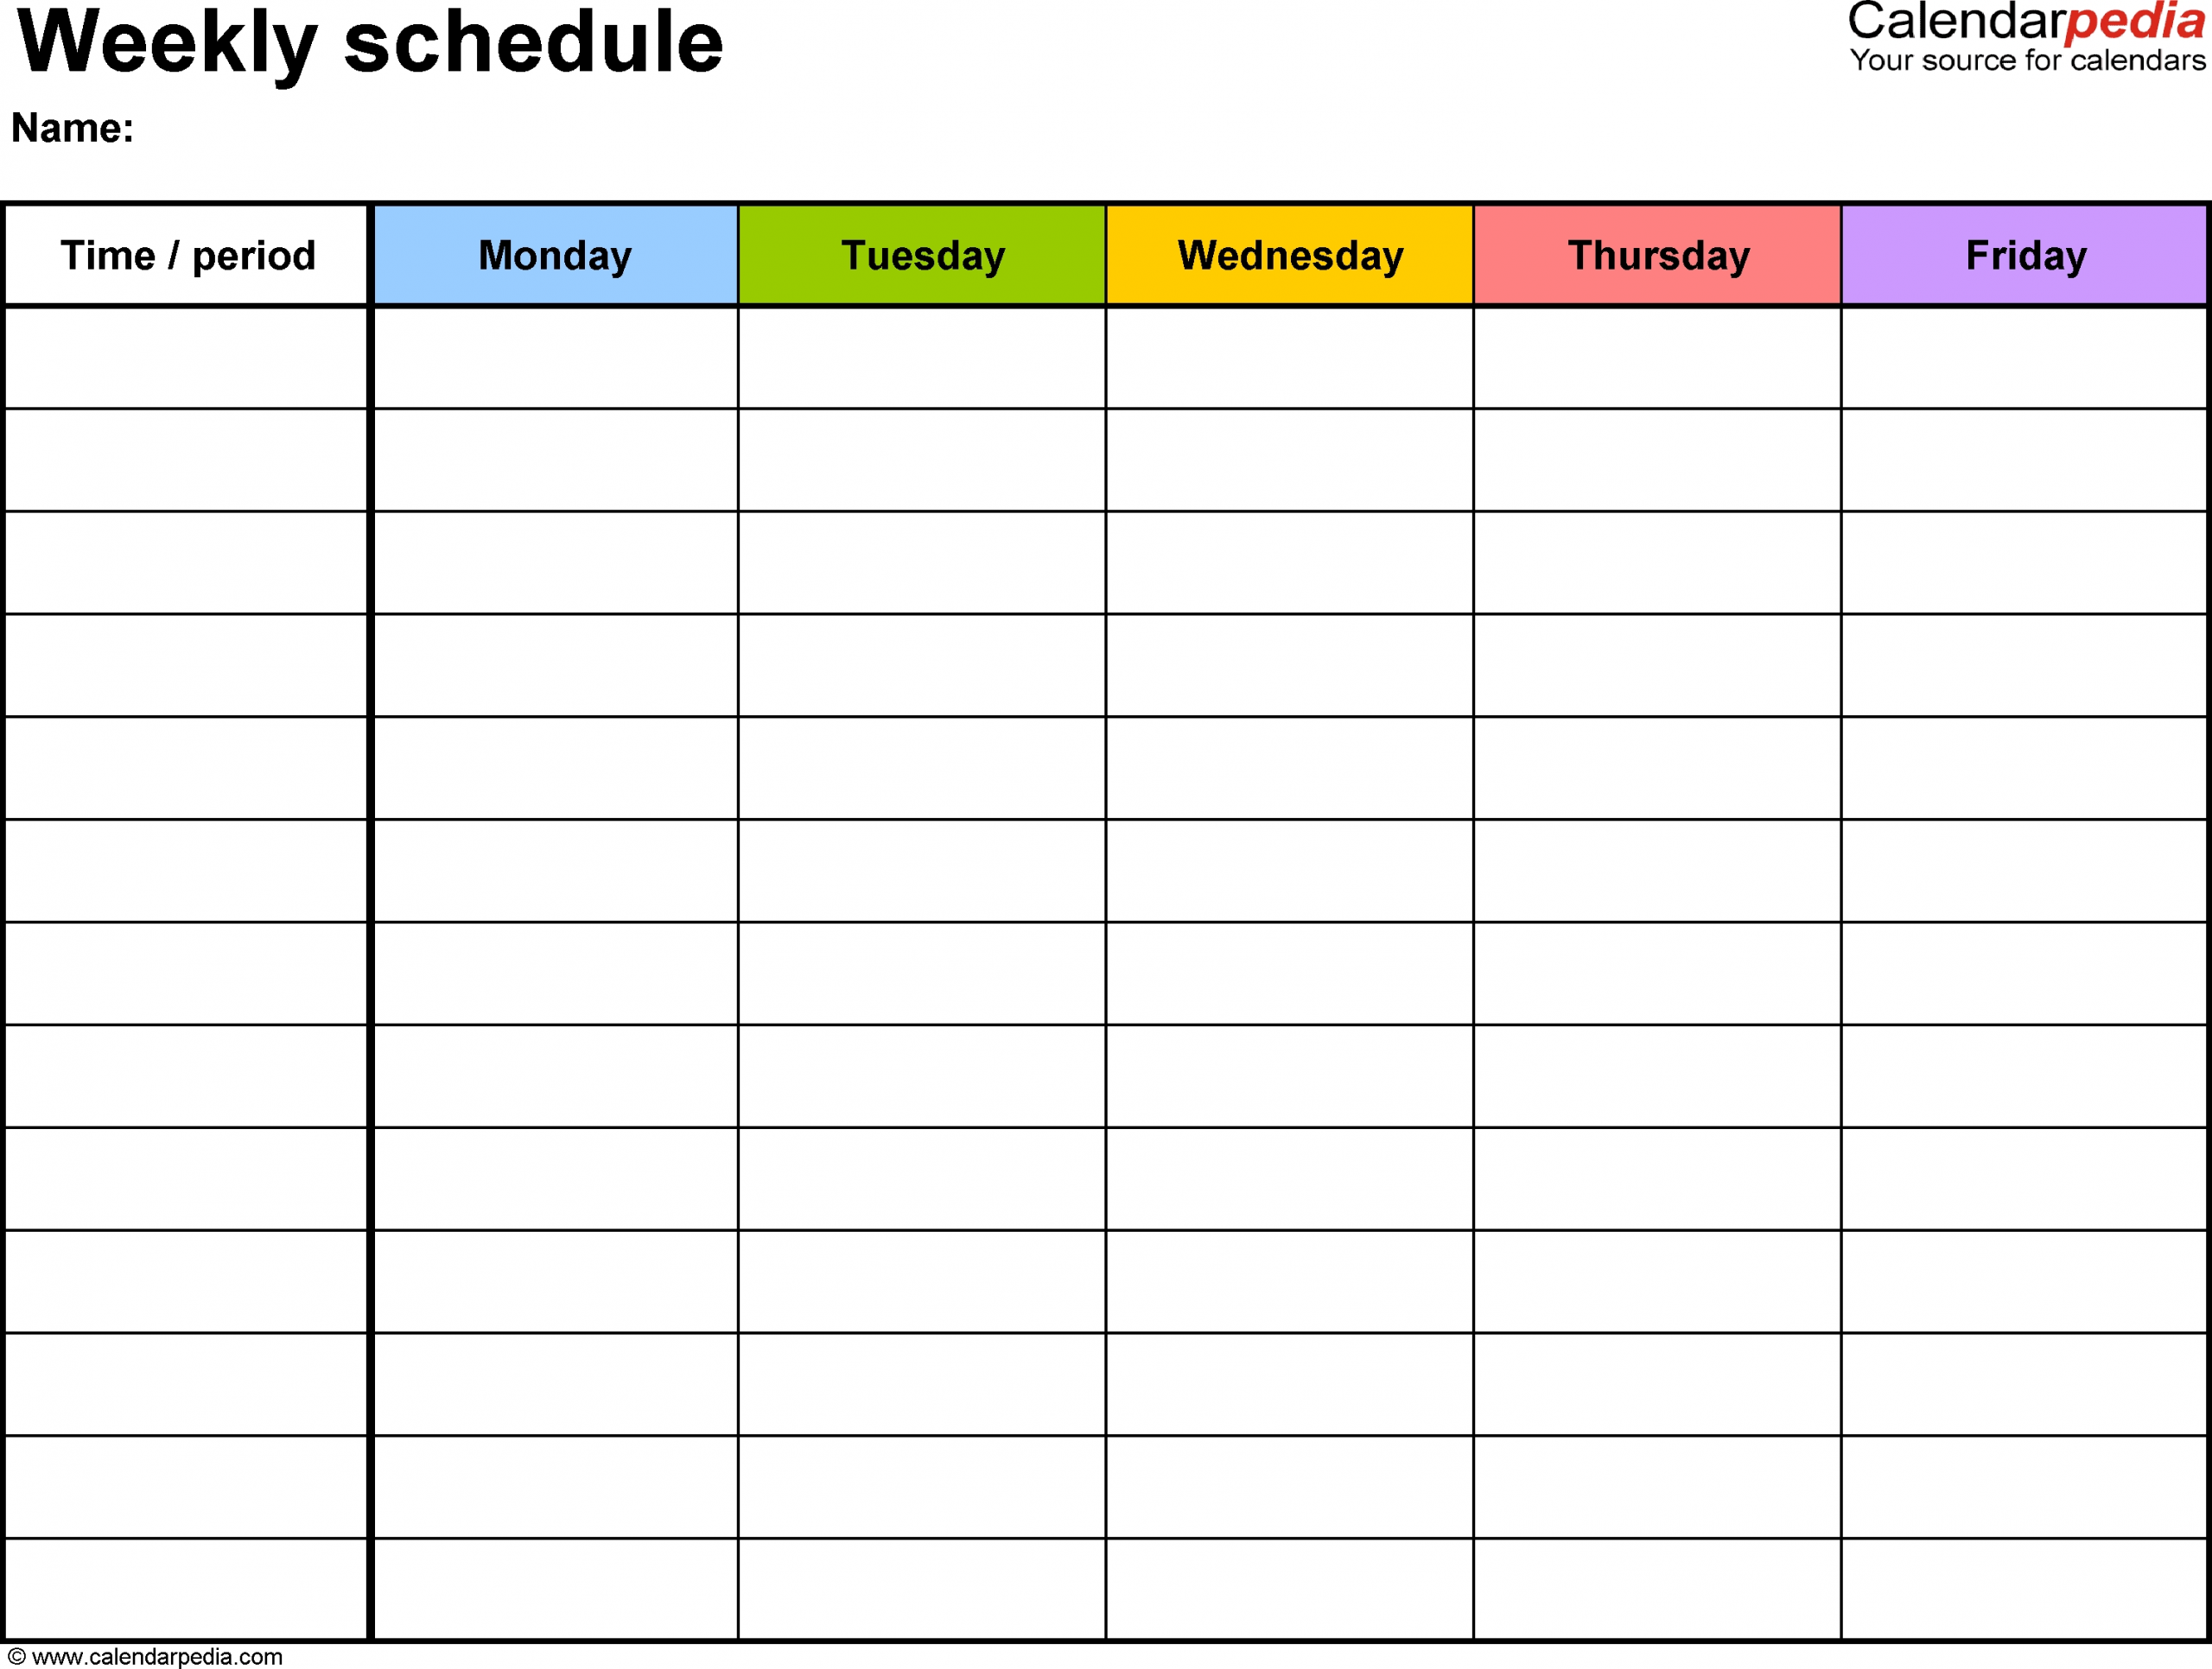 Free Weekly Schedule Templates For Word - 18 Templates throughout 7 Day Week Calendar Printable